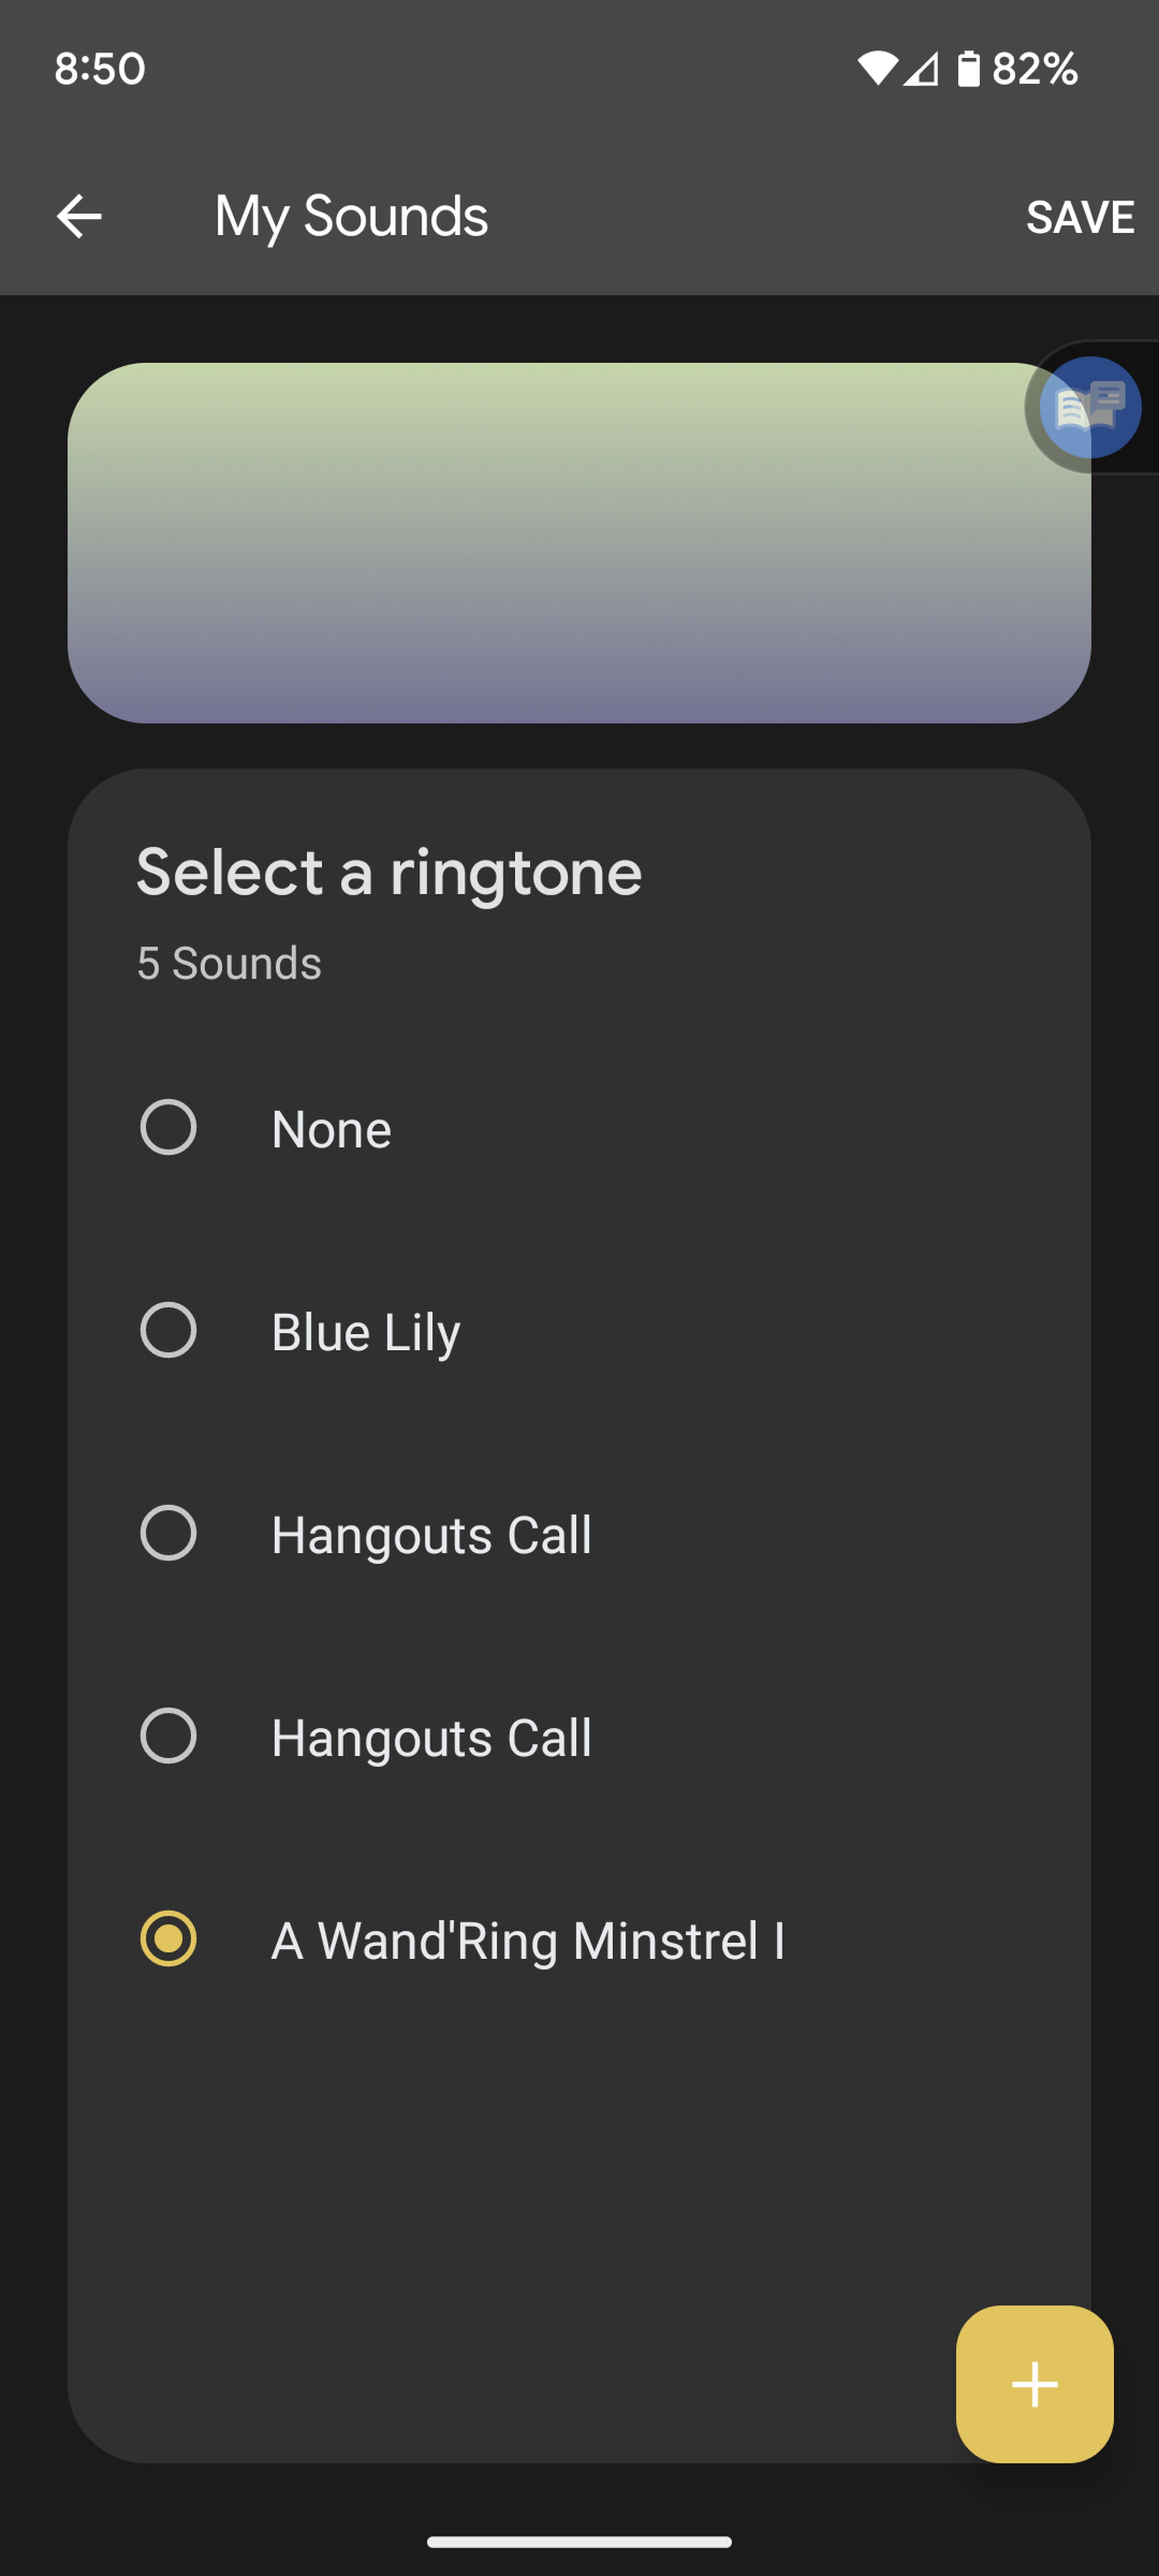 My Sounds page with Select a ringtone and list of songs.